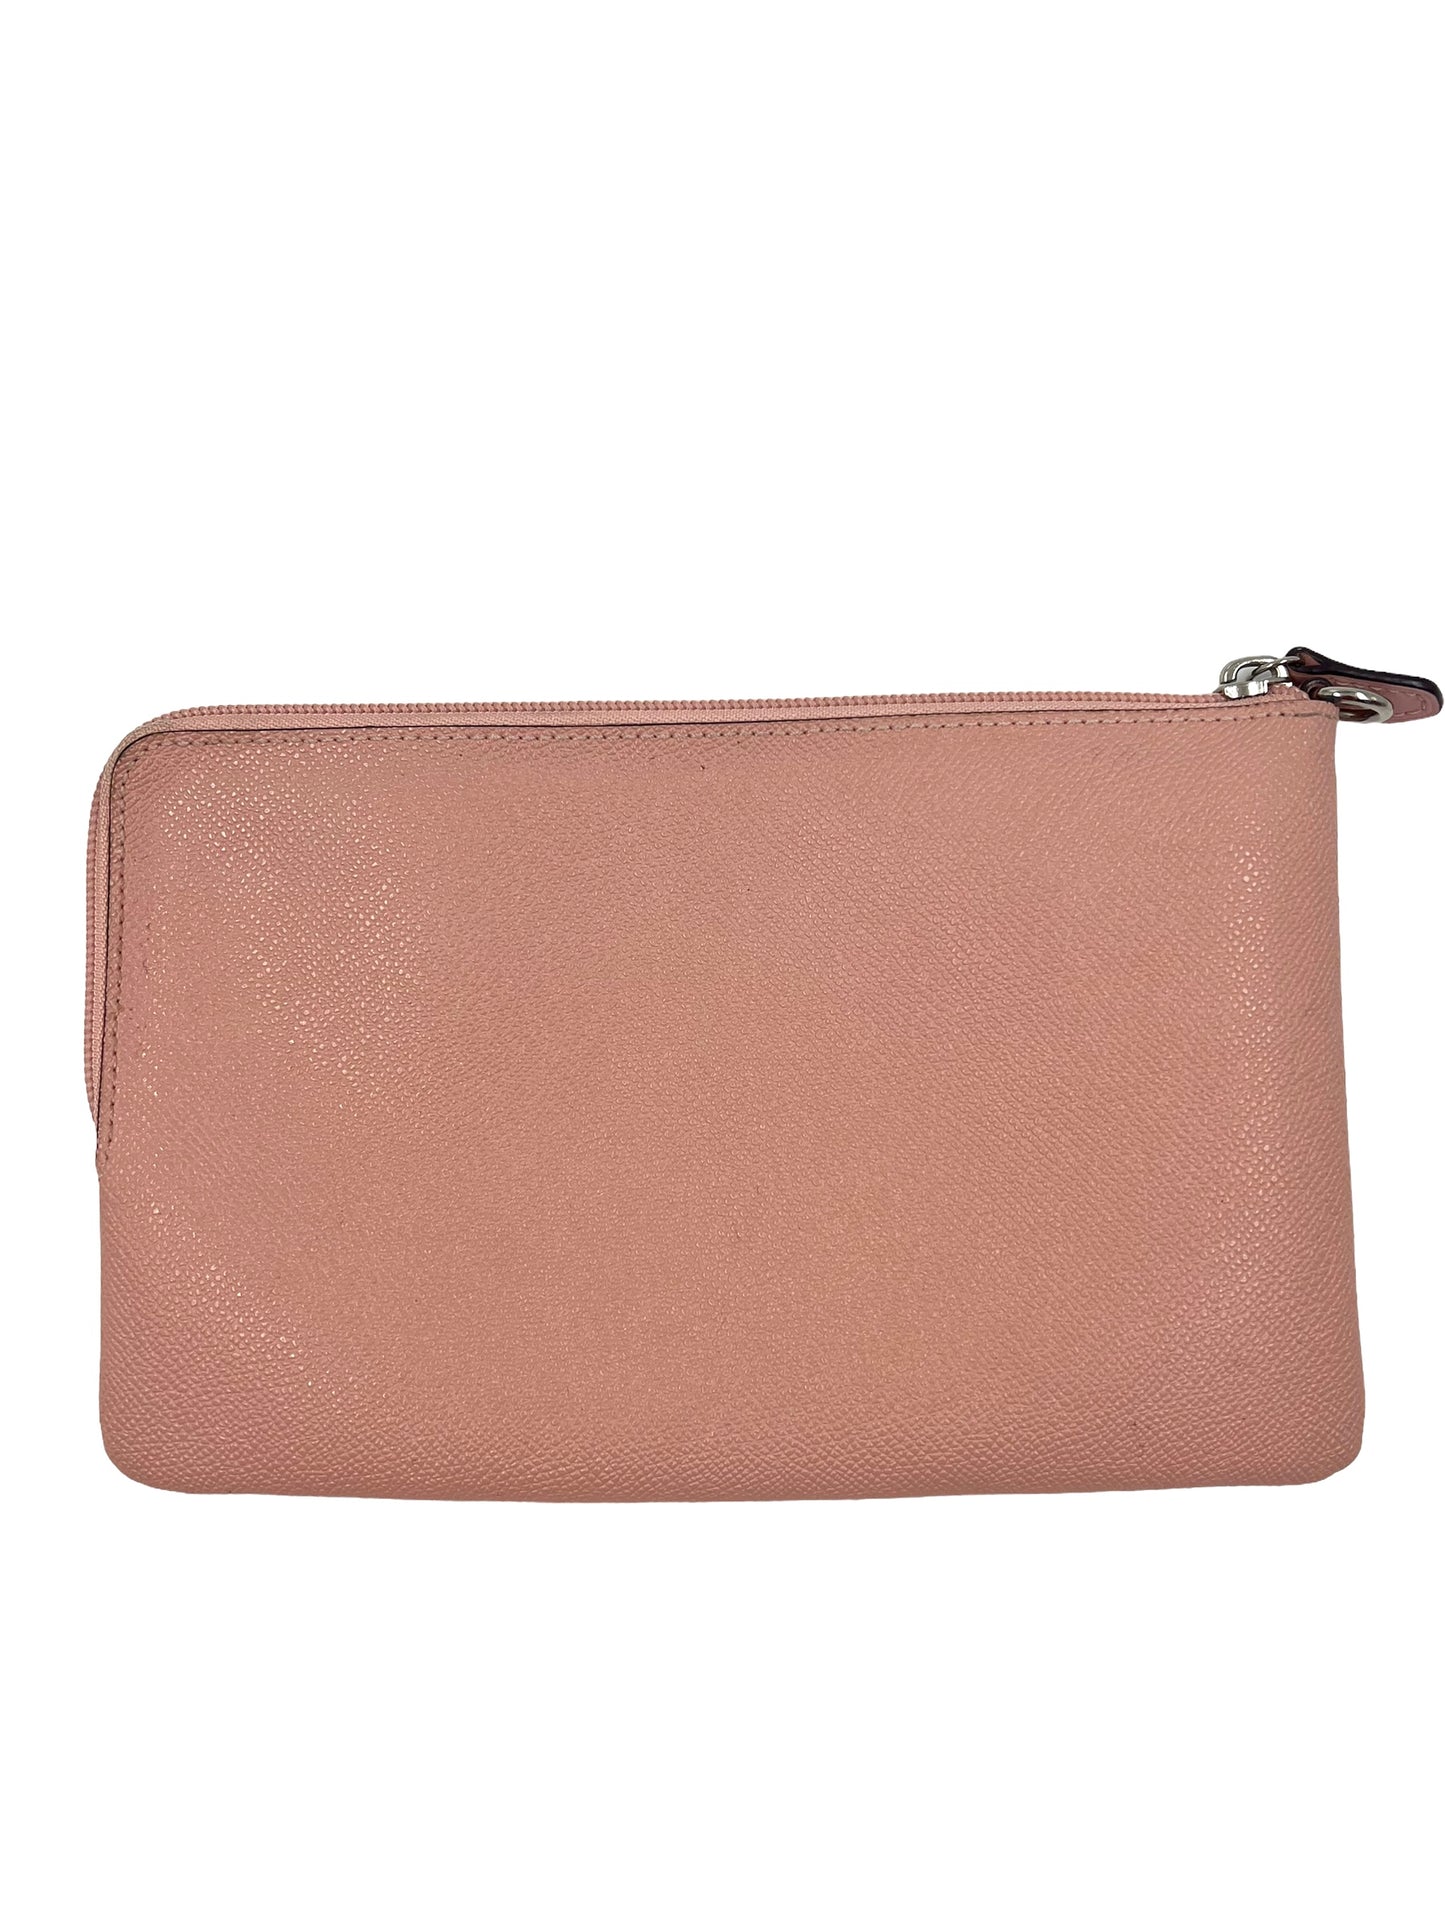 Coach Pink Storypatch Large Wristlet Pouch